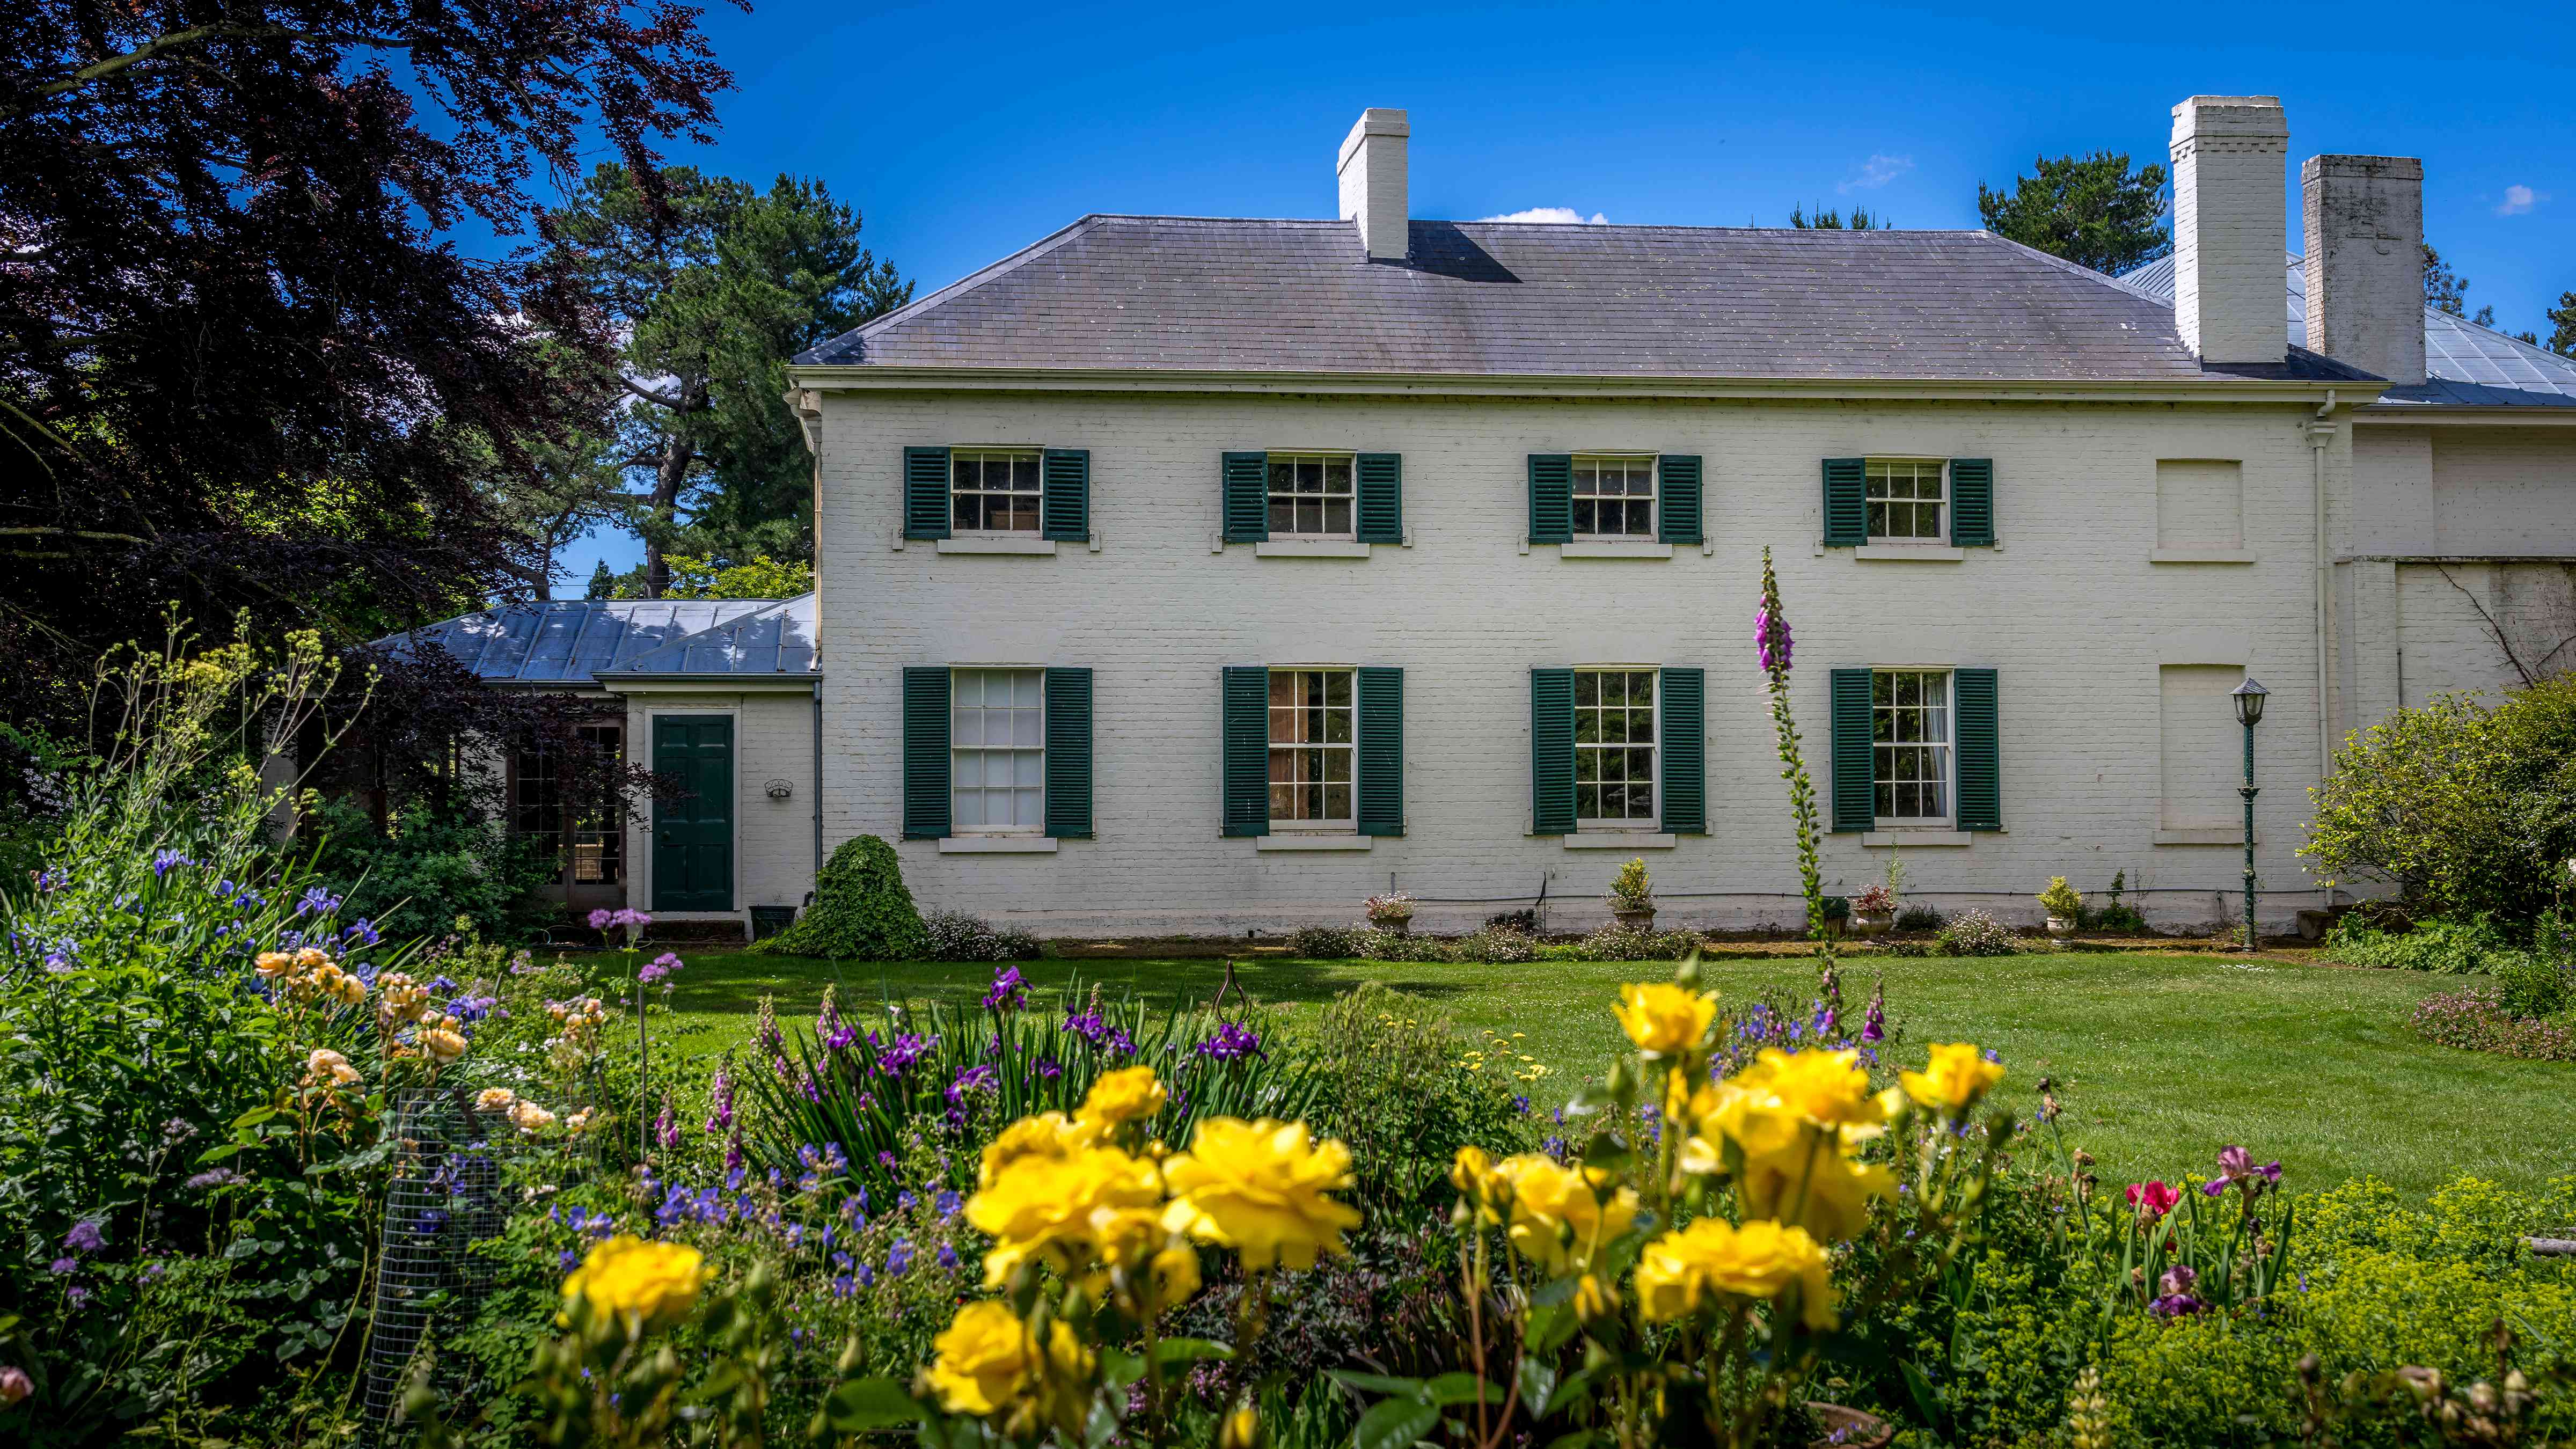 A garden bed with yellow roses and purple and blue perennials is the foreground to this image of the southern wing of the main homestead. A slate roof has multiple chimneys and the two “blind” windows on the end of the wing continue the symmetry of the Georgian architecture. Timber shutters are both on the outside and inside of the downstairs windows. A large tri-colored beech tree is to the left of the shot. Photo: Rob Burnett.